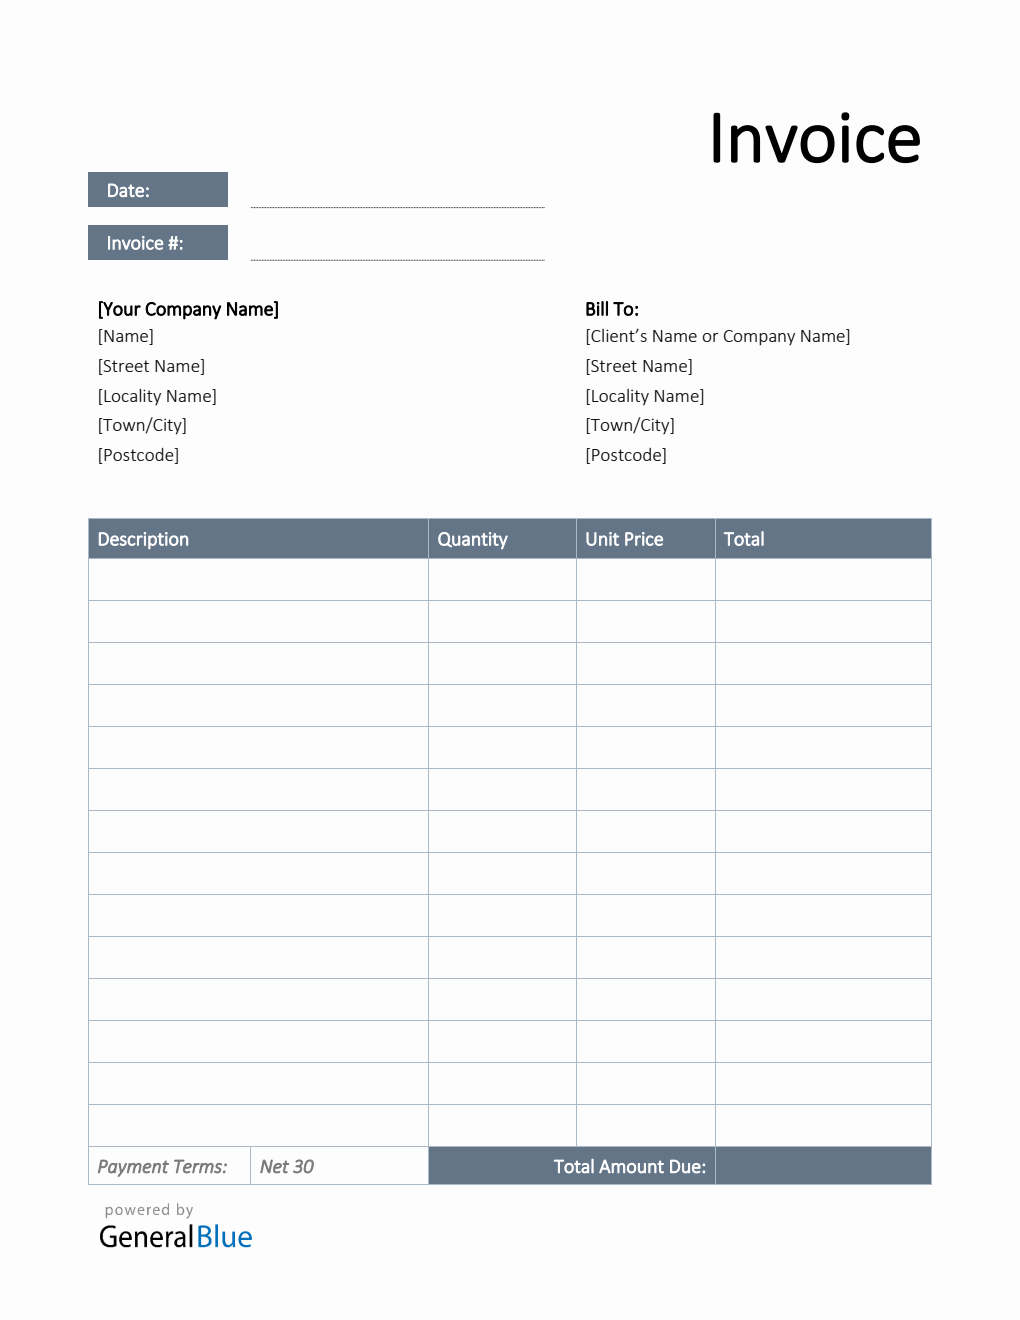 Invoice Template for U.K. in Word (Simple) Inside Template Of Invoice In Word